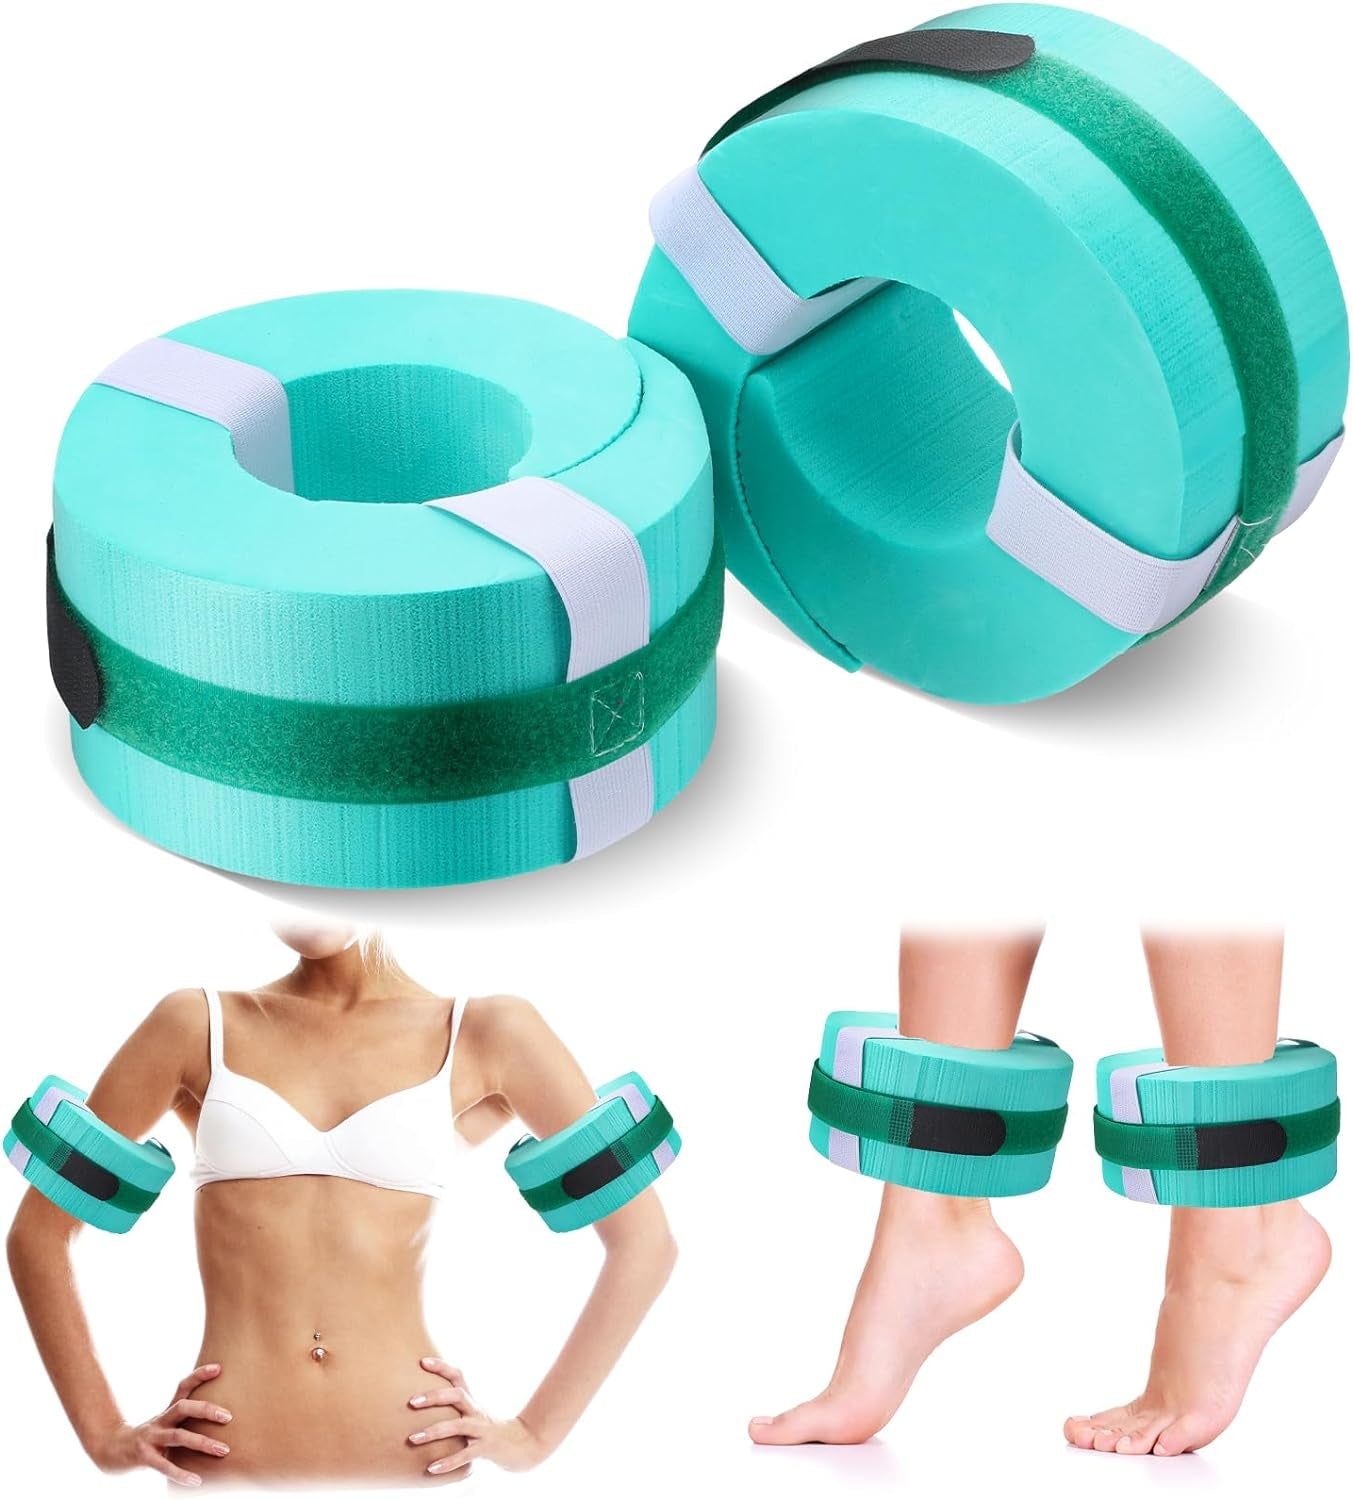 2 Pcs Foam Swim Aquatic Cuffs Equipment Water Aerobics Float Ring with Detachable Hook and Loop Fastener Fitness Workout Set for Swimming Fitness Training Pool Exercise